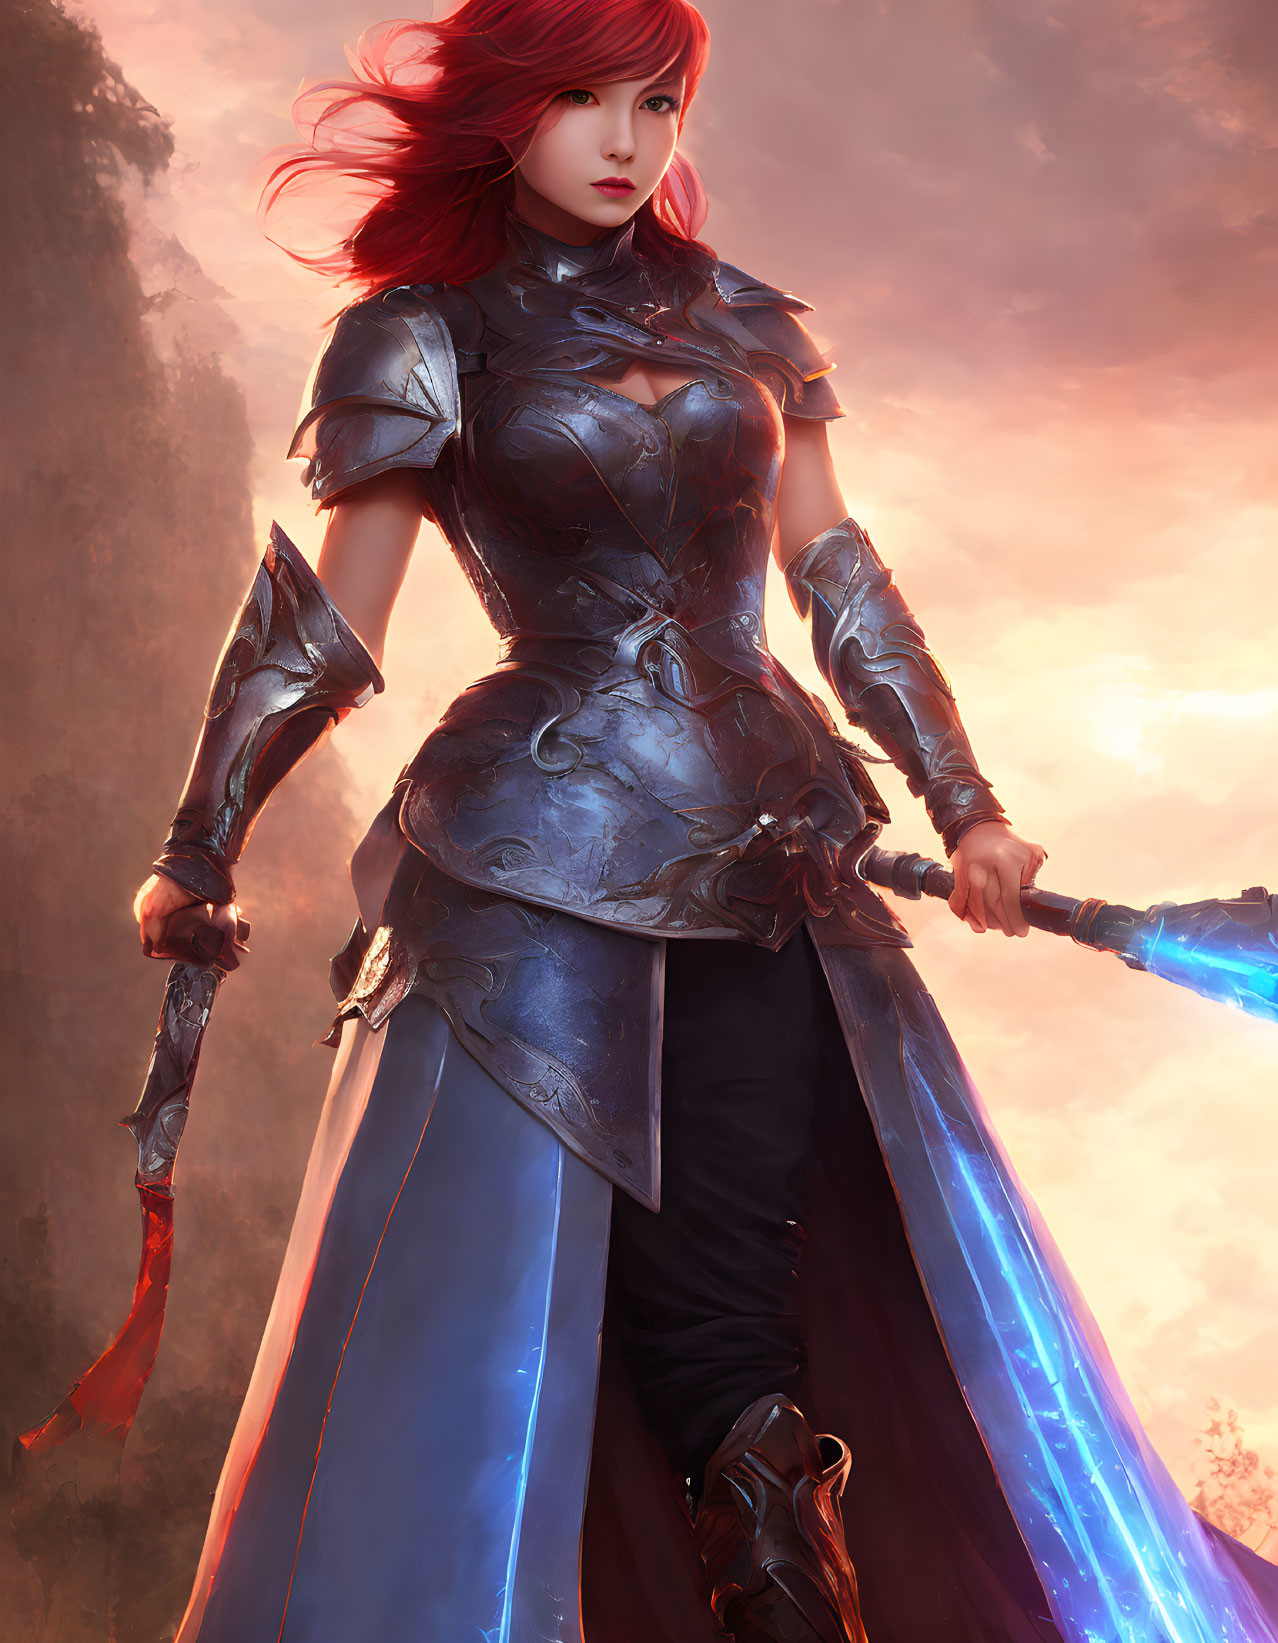 Fantasy warrior woman with red hair in metallic armor wields glowing blue sword in misty, red